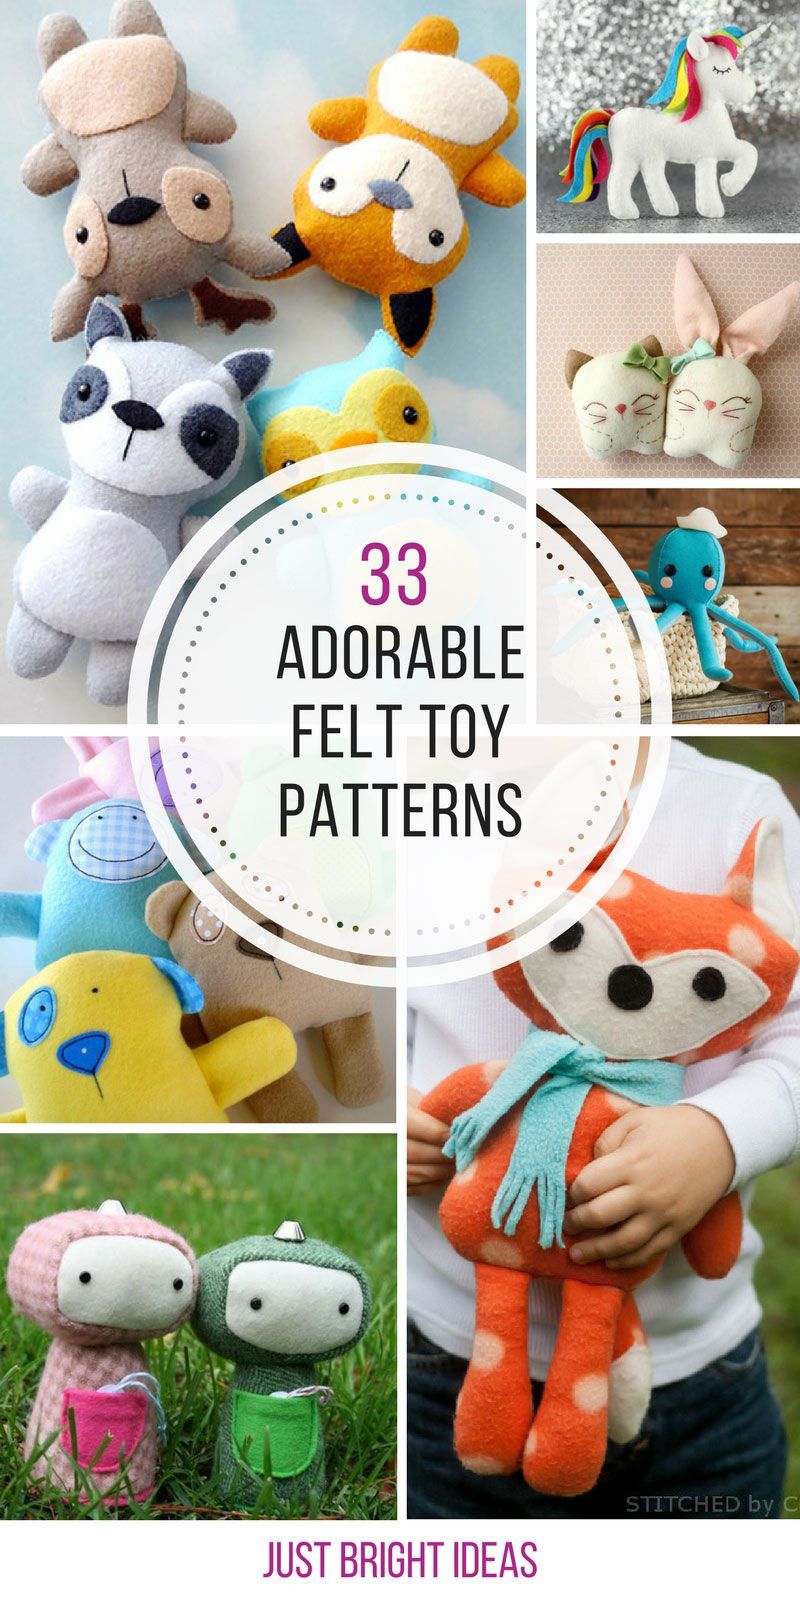 33 Super Cute Felt Toy Patterns Your Kids Will Love to Play With! -   22 sewing crafts gifts
 ideas